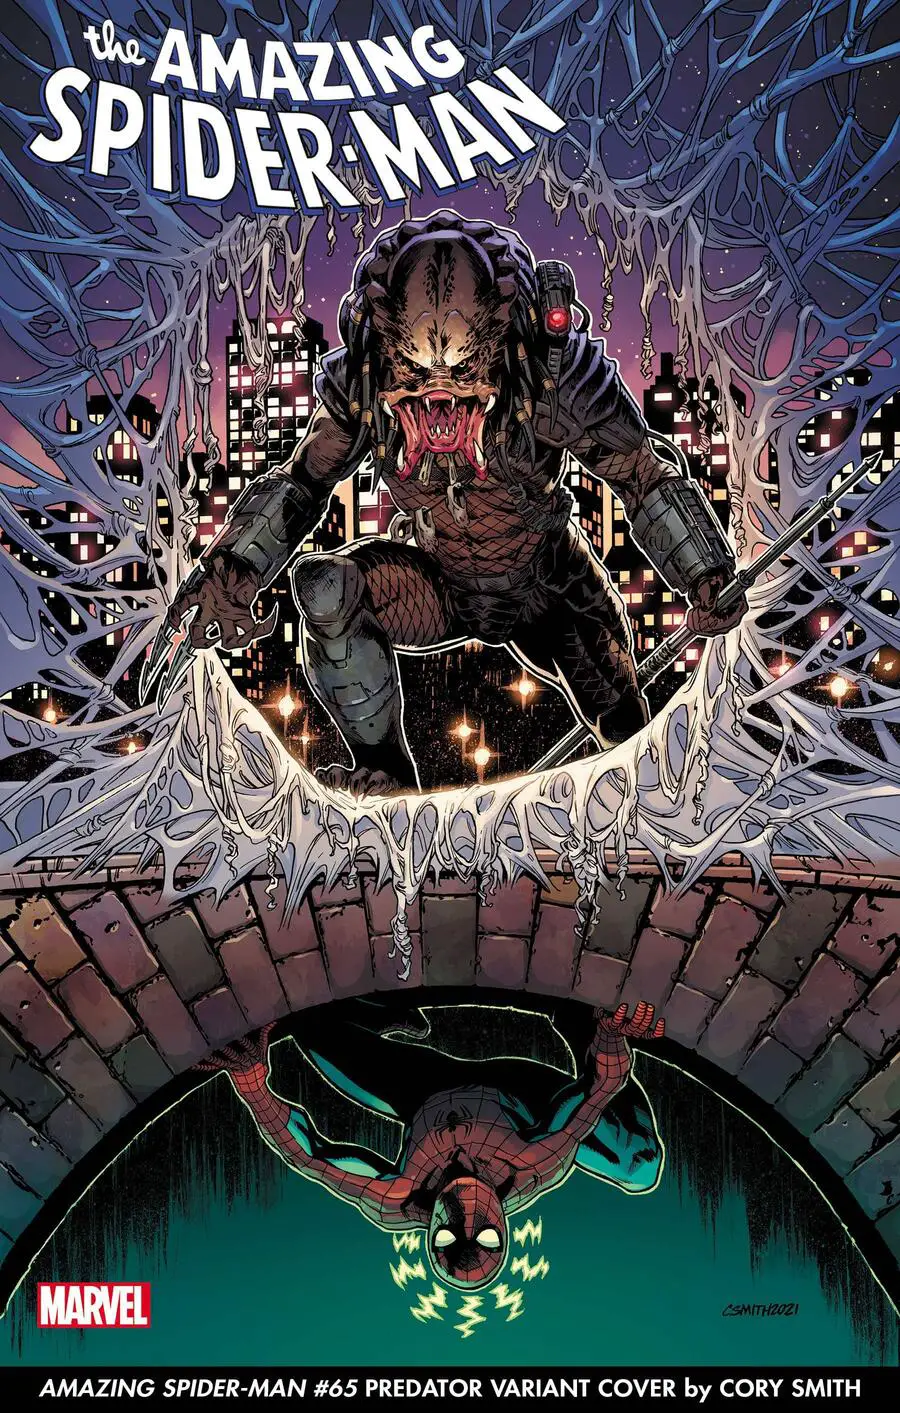 AMAZING SPIDER-MAN #65 PREDATOR VARIANT COVER by CORY SMITH